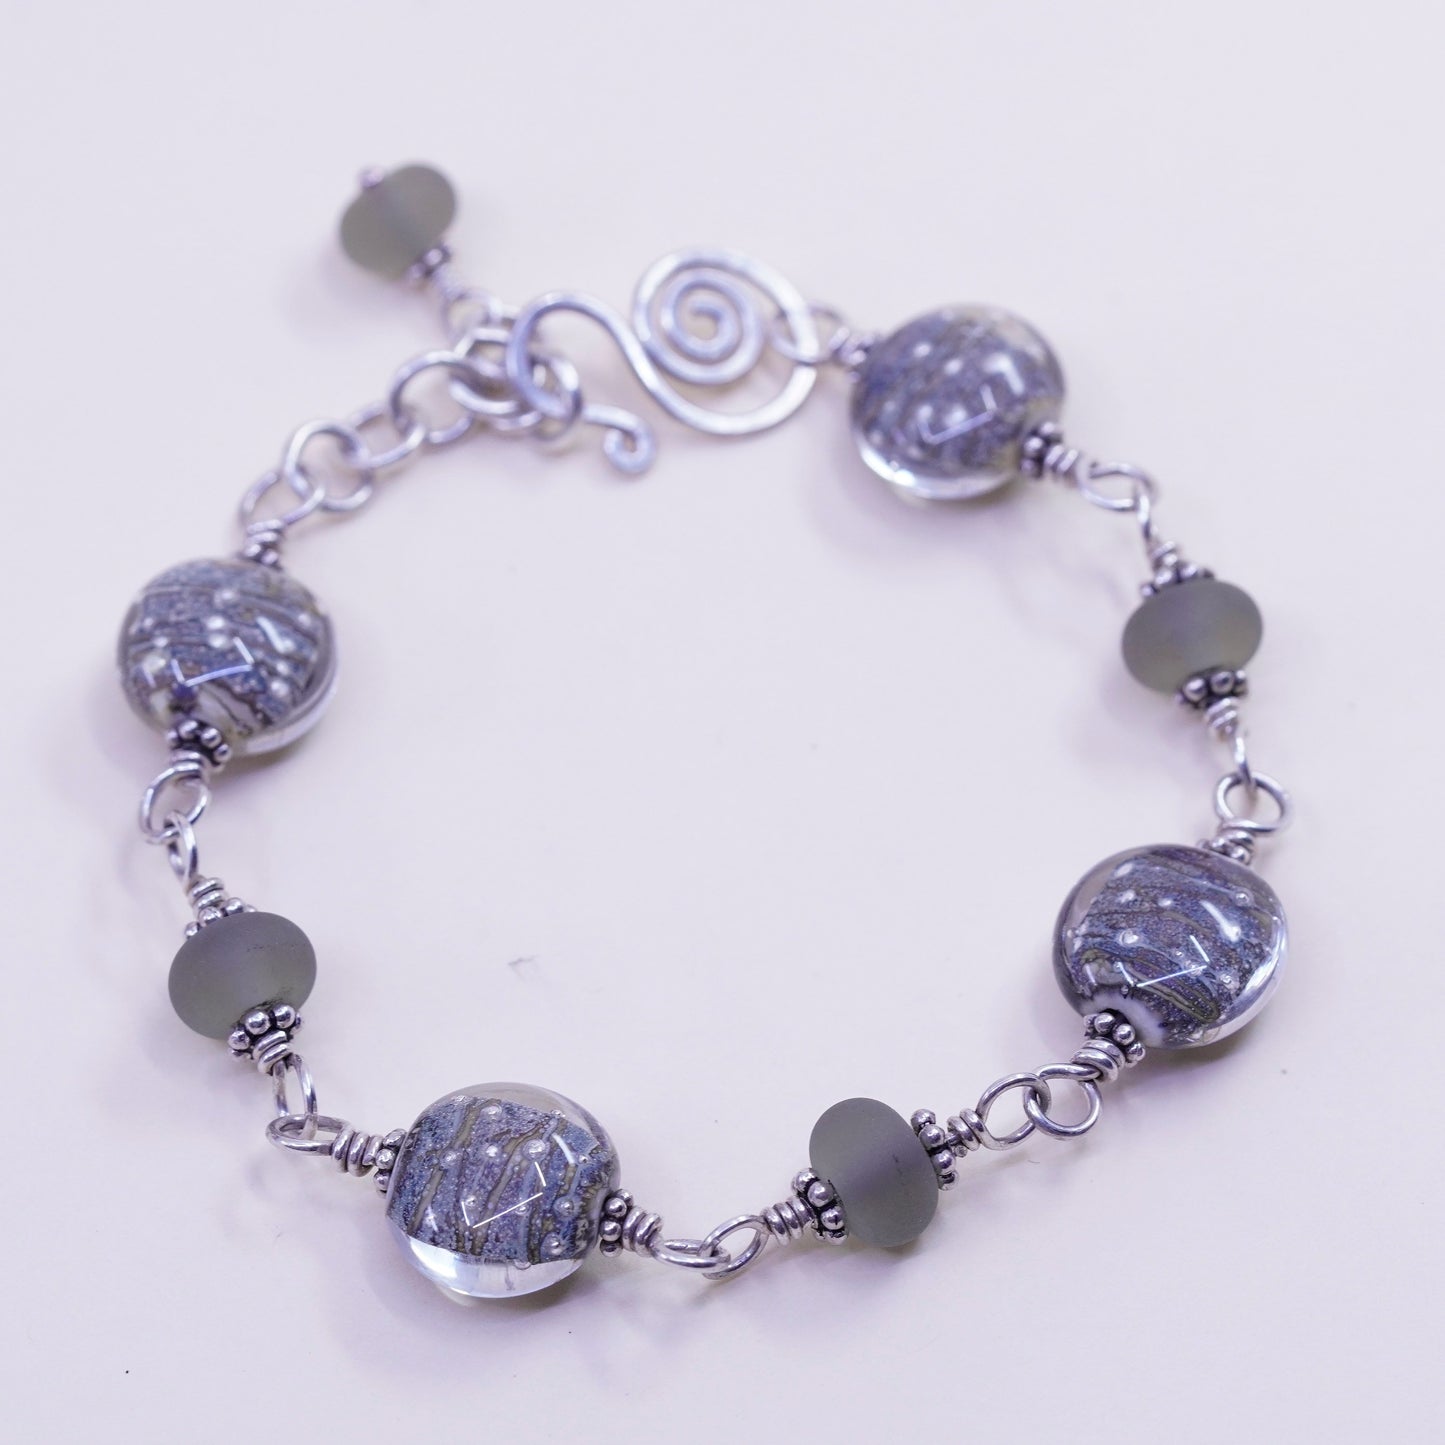 7.25”, vintage 925 Sterling 925 silver beads bracelet with artisan foiled glass